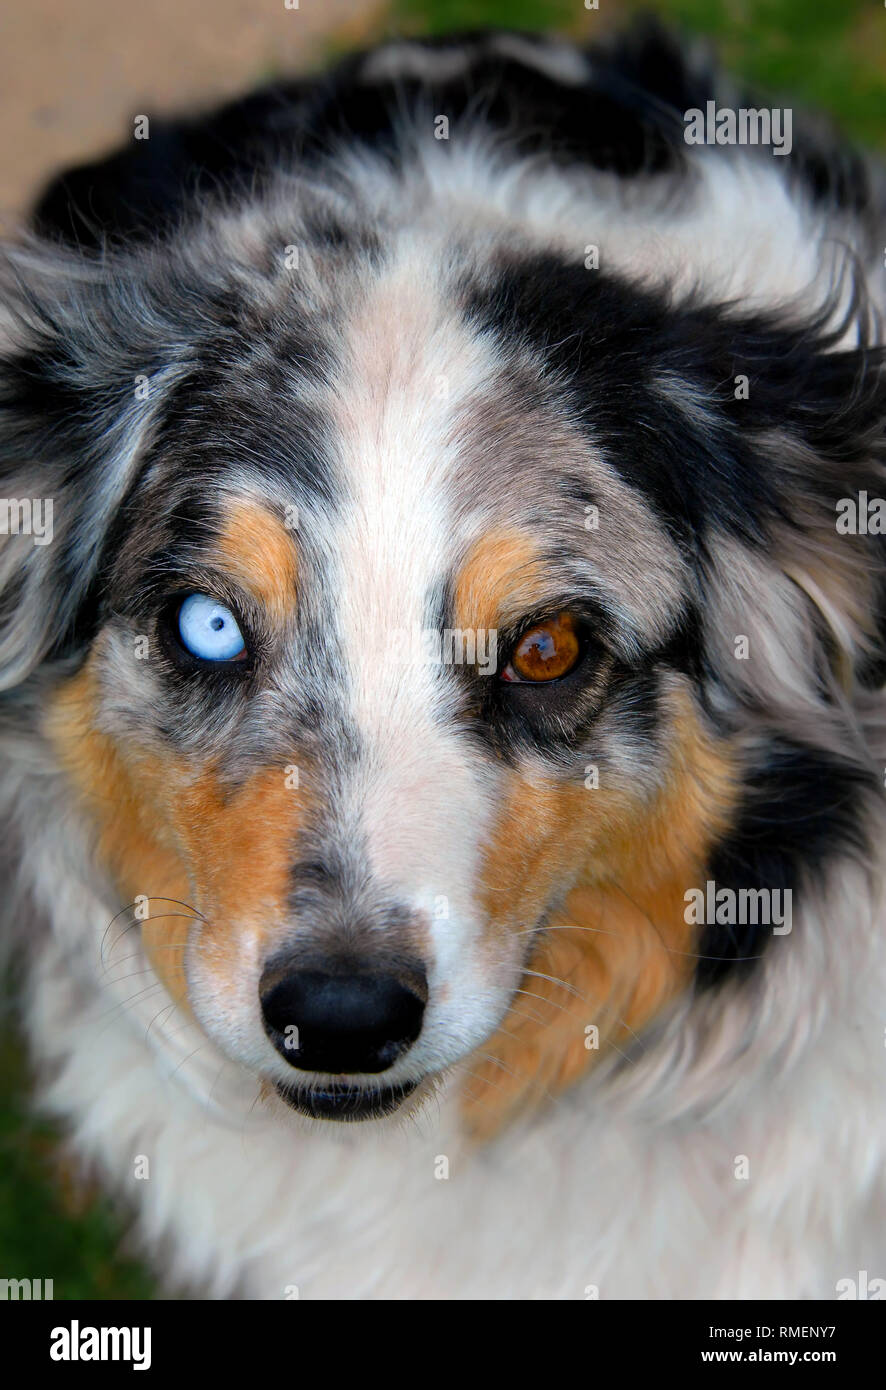 Australian Shepherd has a startling light blue eye and a brown eye.  Verigated and colored fur trims his face with brown, black and white. Stock Photo